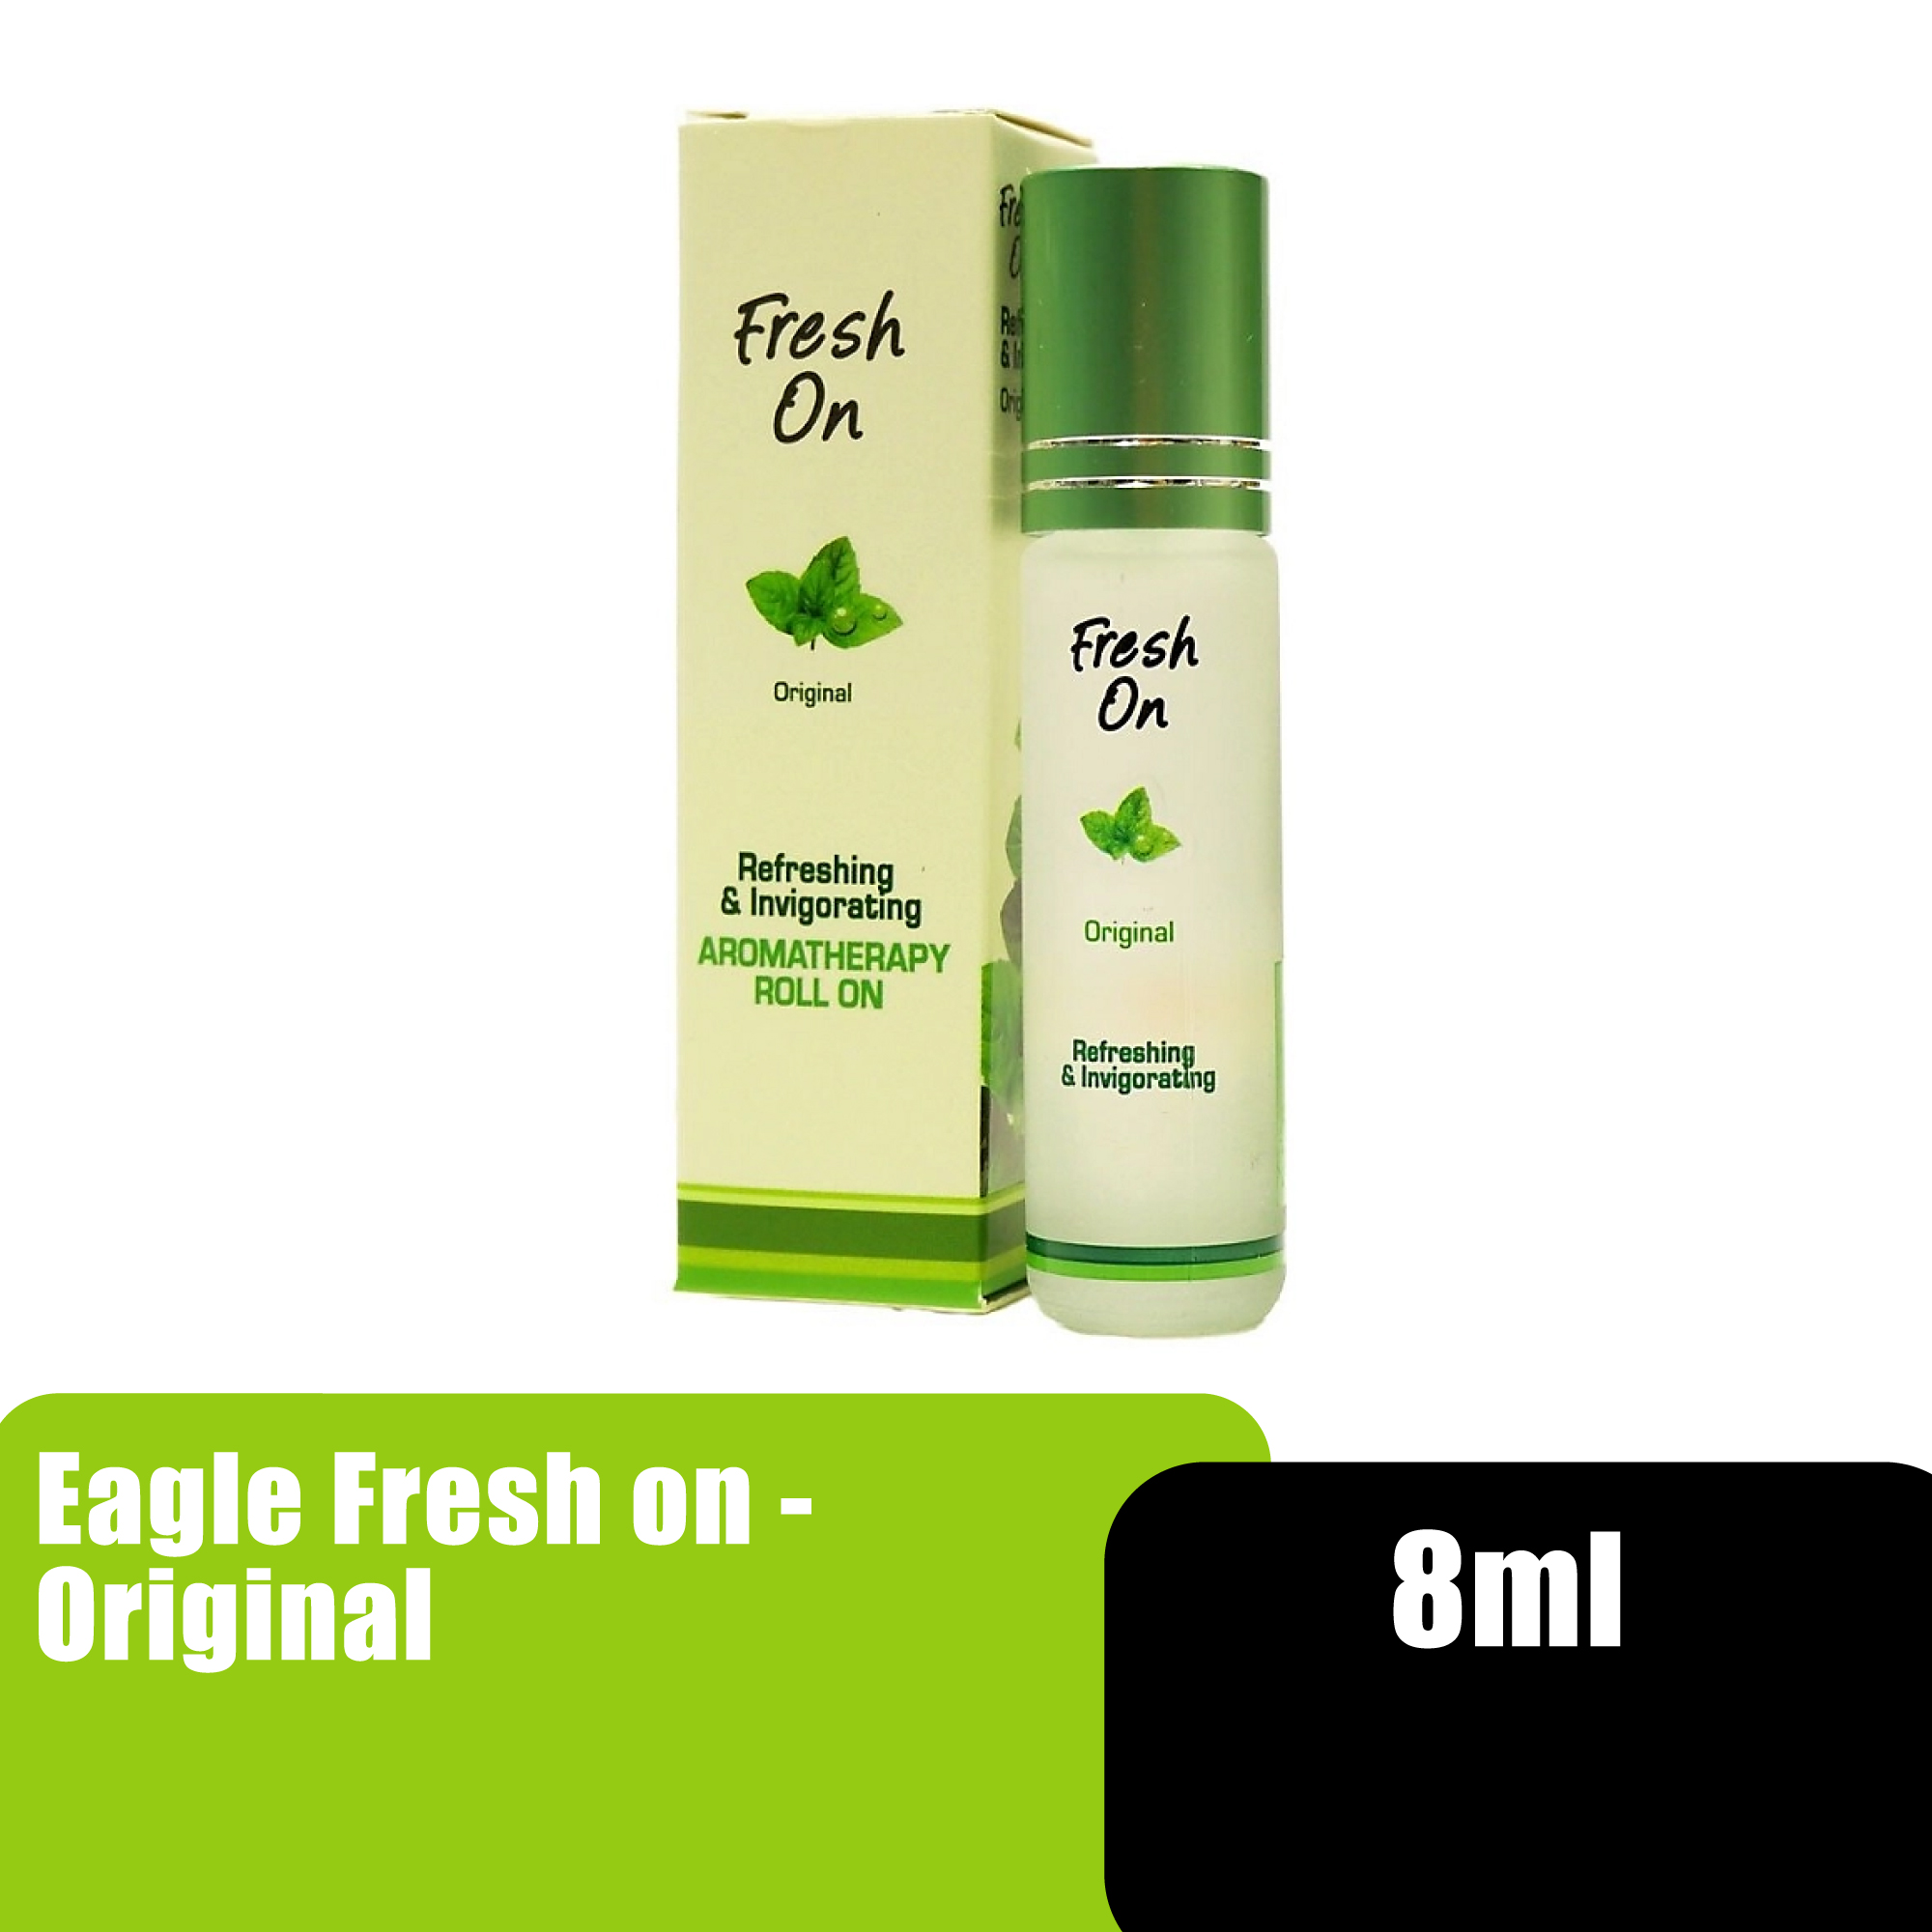 Eagle Fresh On Roll on Aromatherapy Oil 8ml - Original Citrus / 滚珠柑橘精油 (Fight for fatigue)